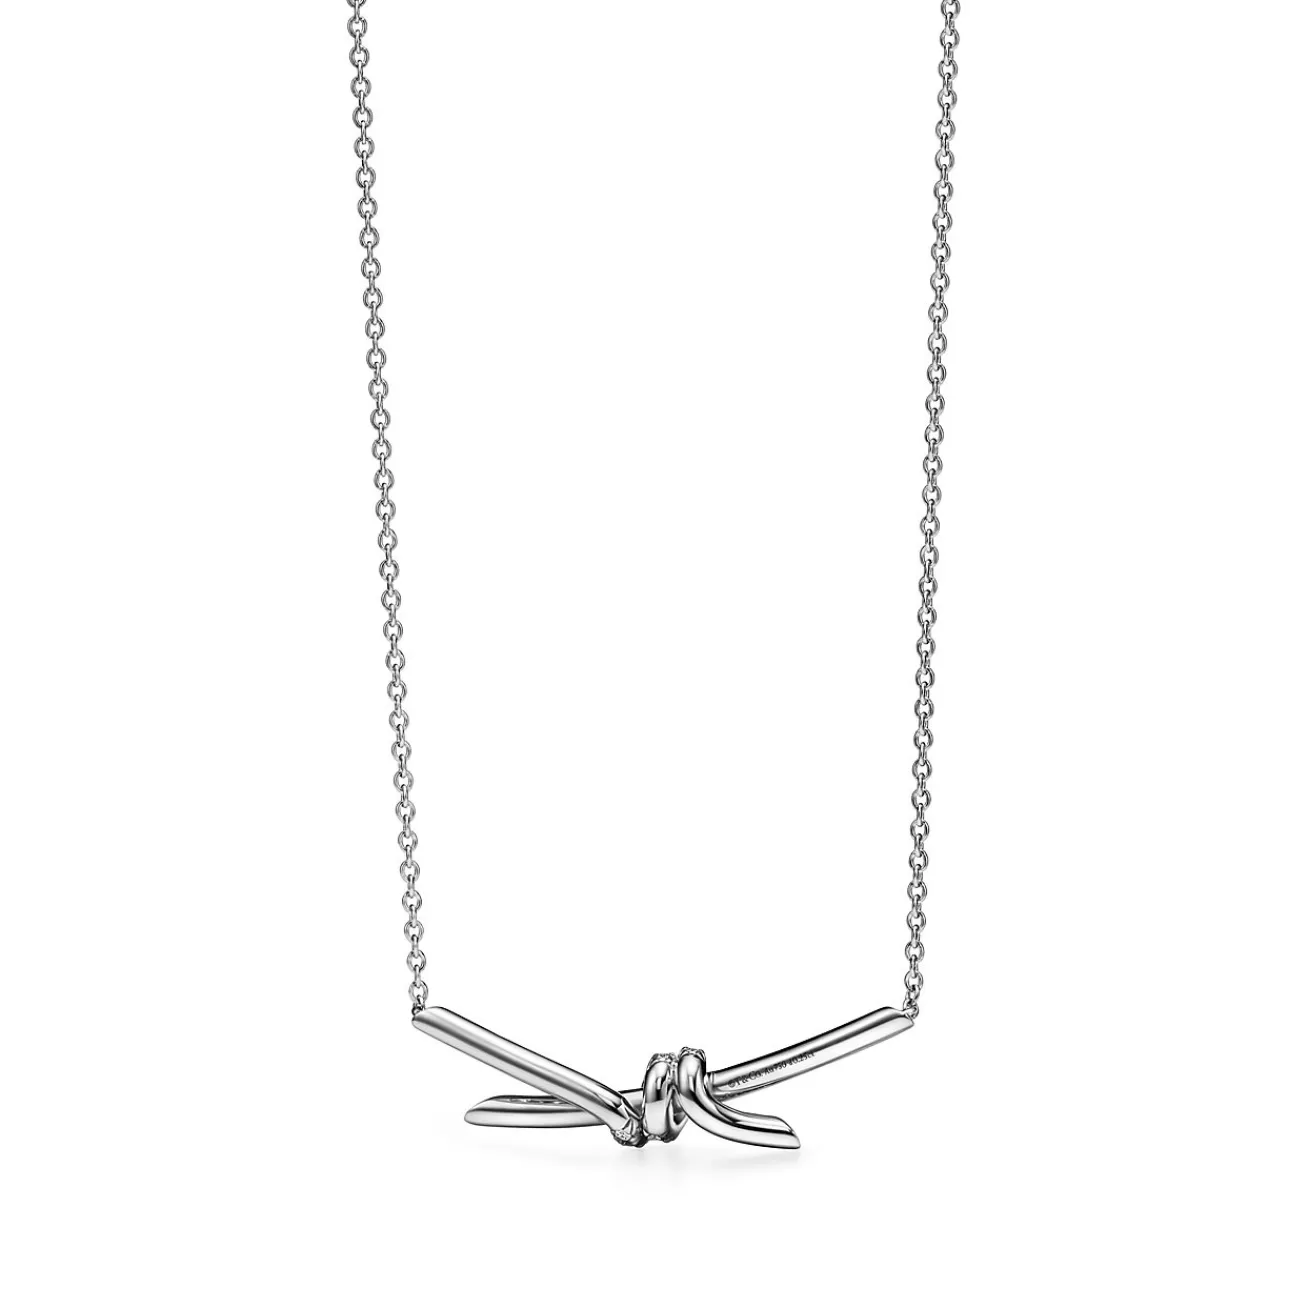 Tiffany & Co. Tiffany Knot Pendant in White Gold with Diamonds | ^ Necklaces & Pendants | Men's Jewelry